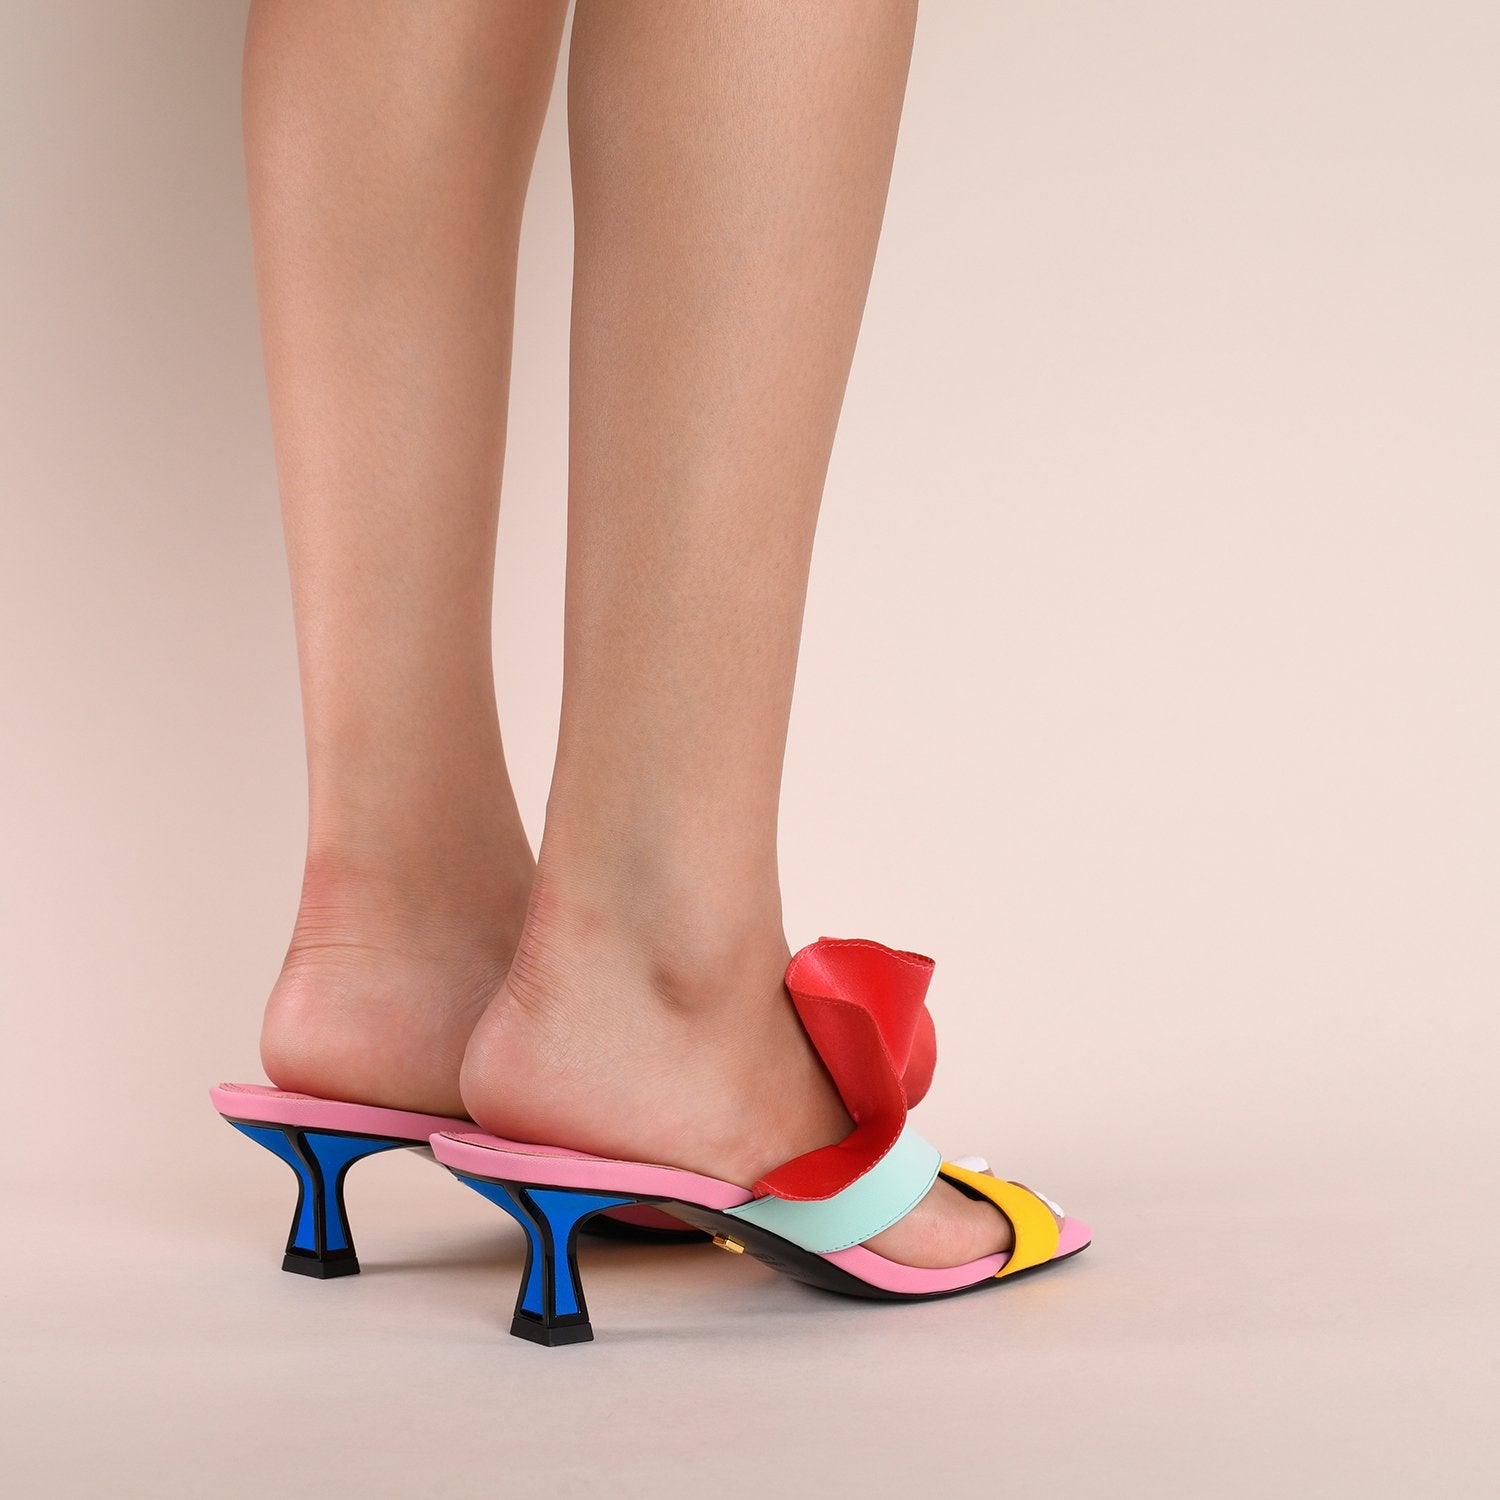 Back outer side view of a model wearing a pair of the kat maconie dia kitten heel. This slip on heel features a pink sole, a tiny blue heel outlined with black, two cross over straps, and a pink/red satin ruffle attached to the upper.